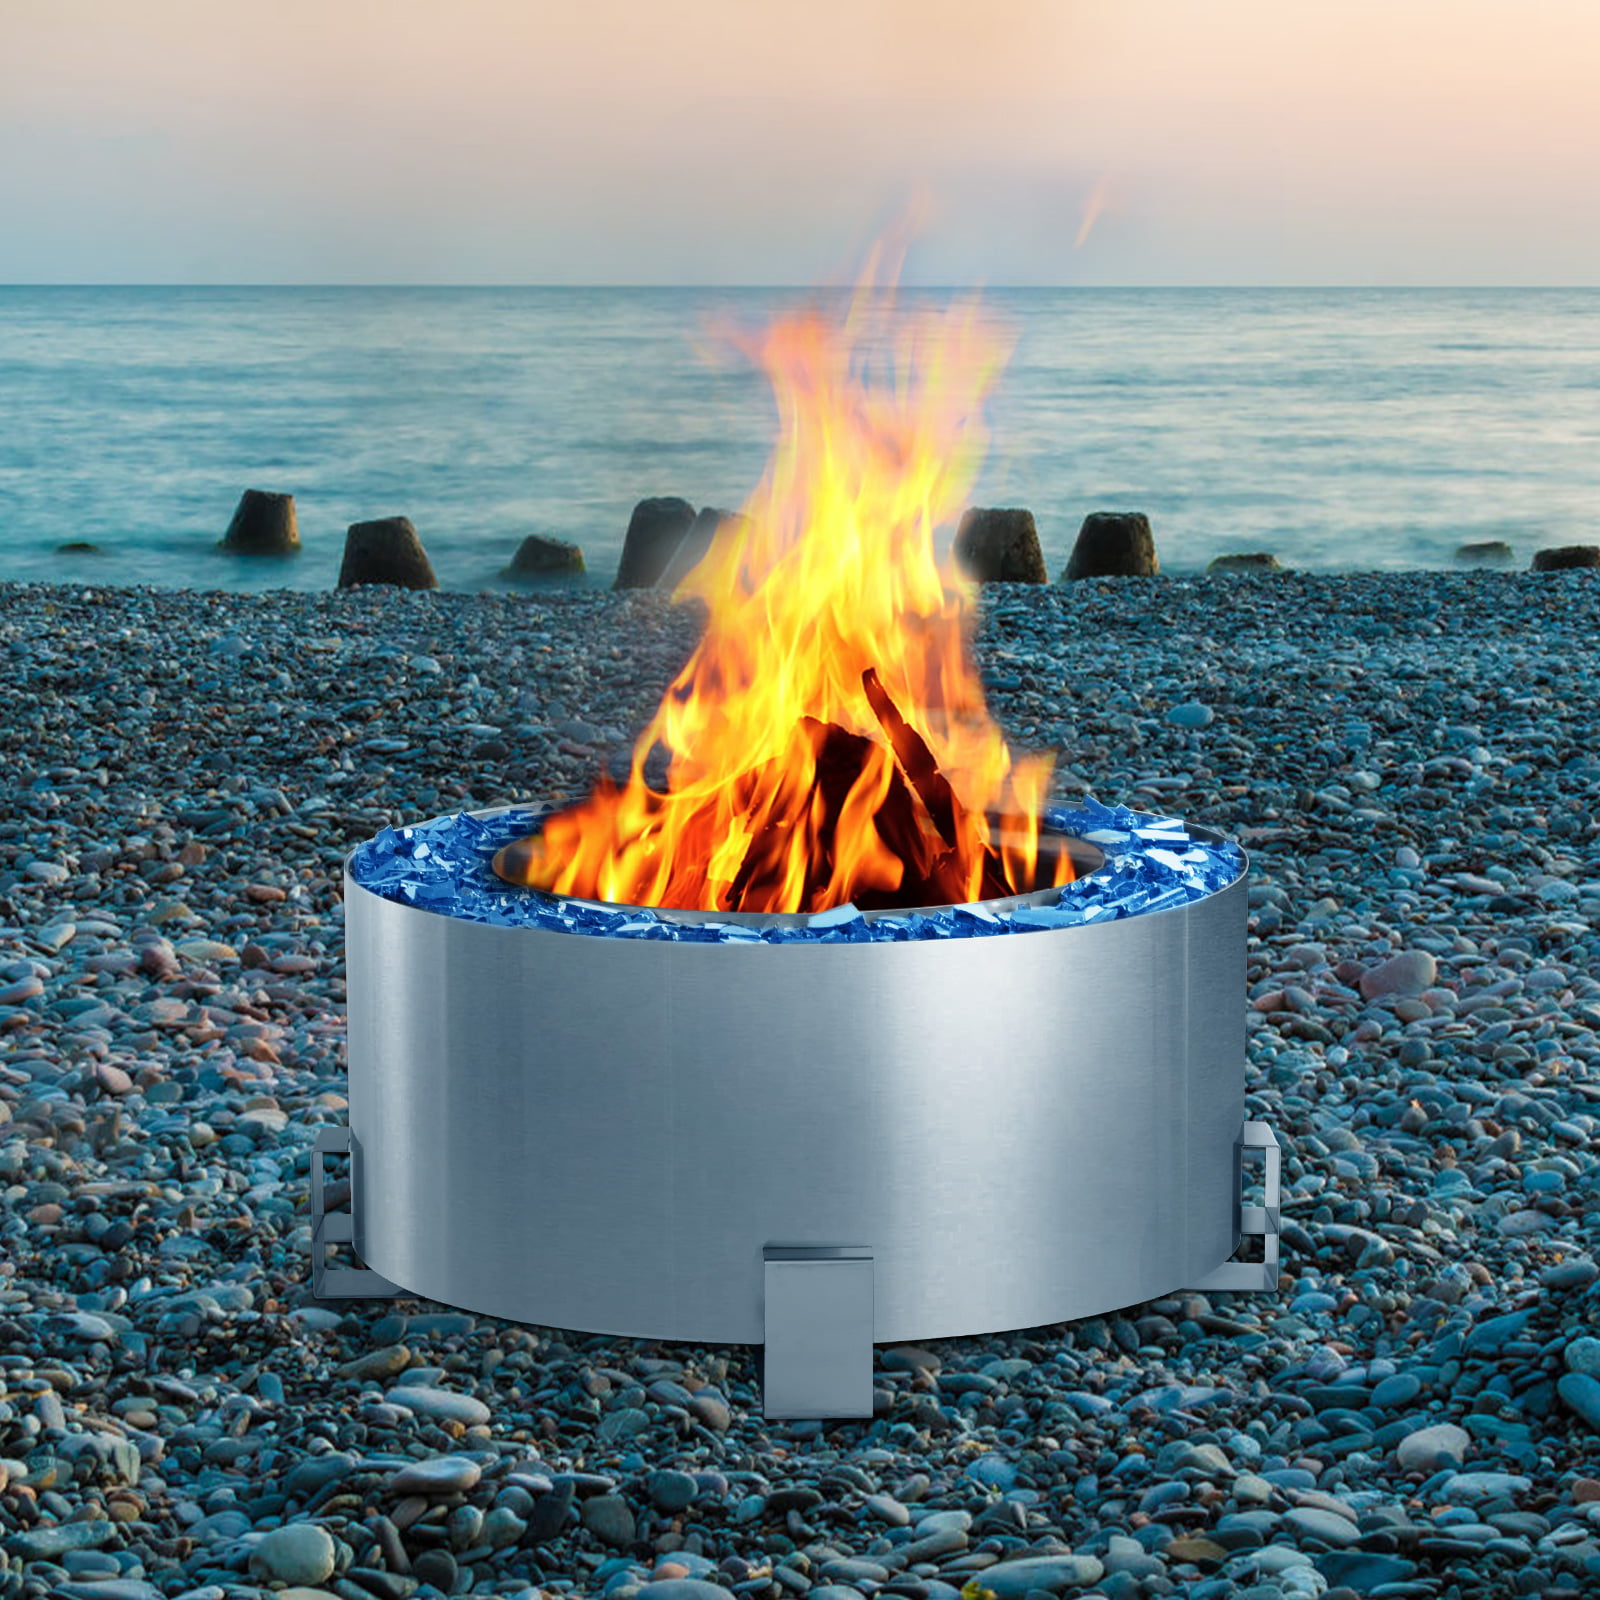 Danrelax 28.5'' Fire Pit Outdoor Smokeless, 304 Stainless Steel Anti